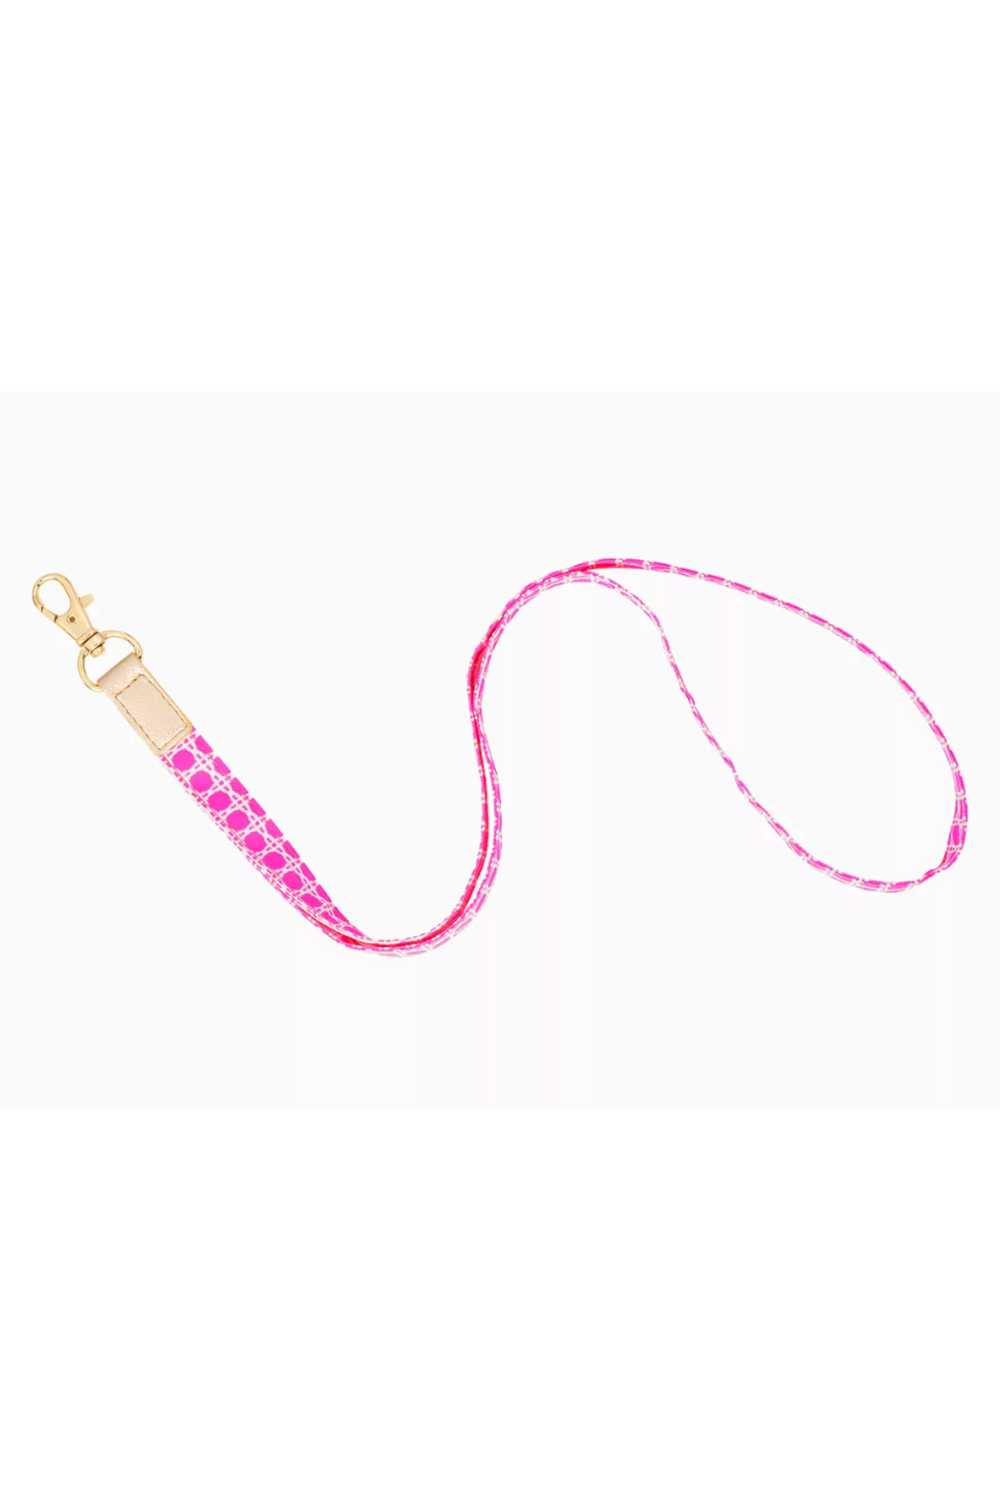 Lilly Lanyard - Havana Pink Caning